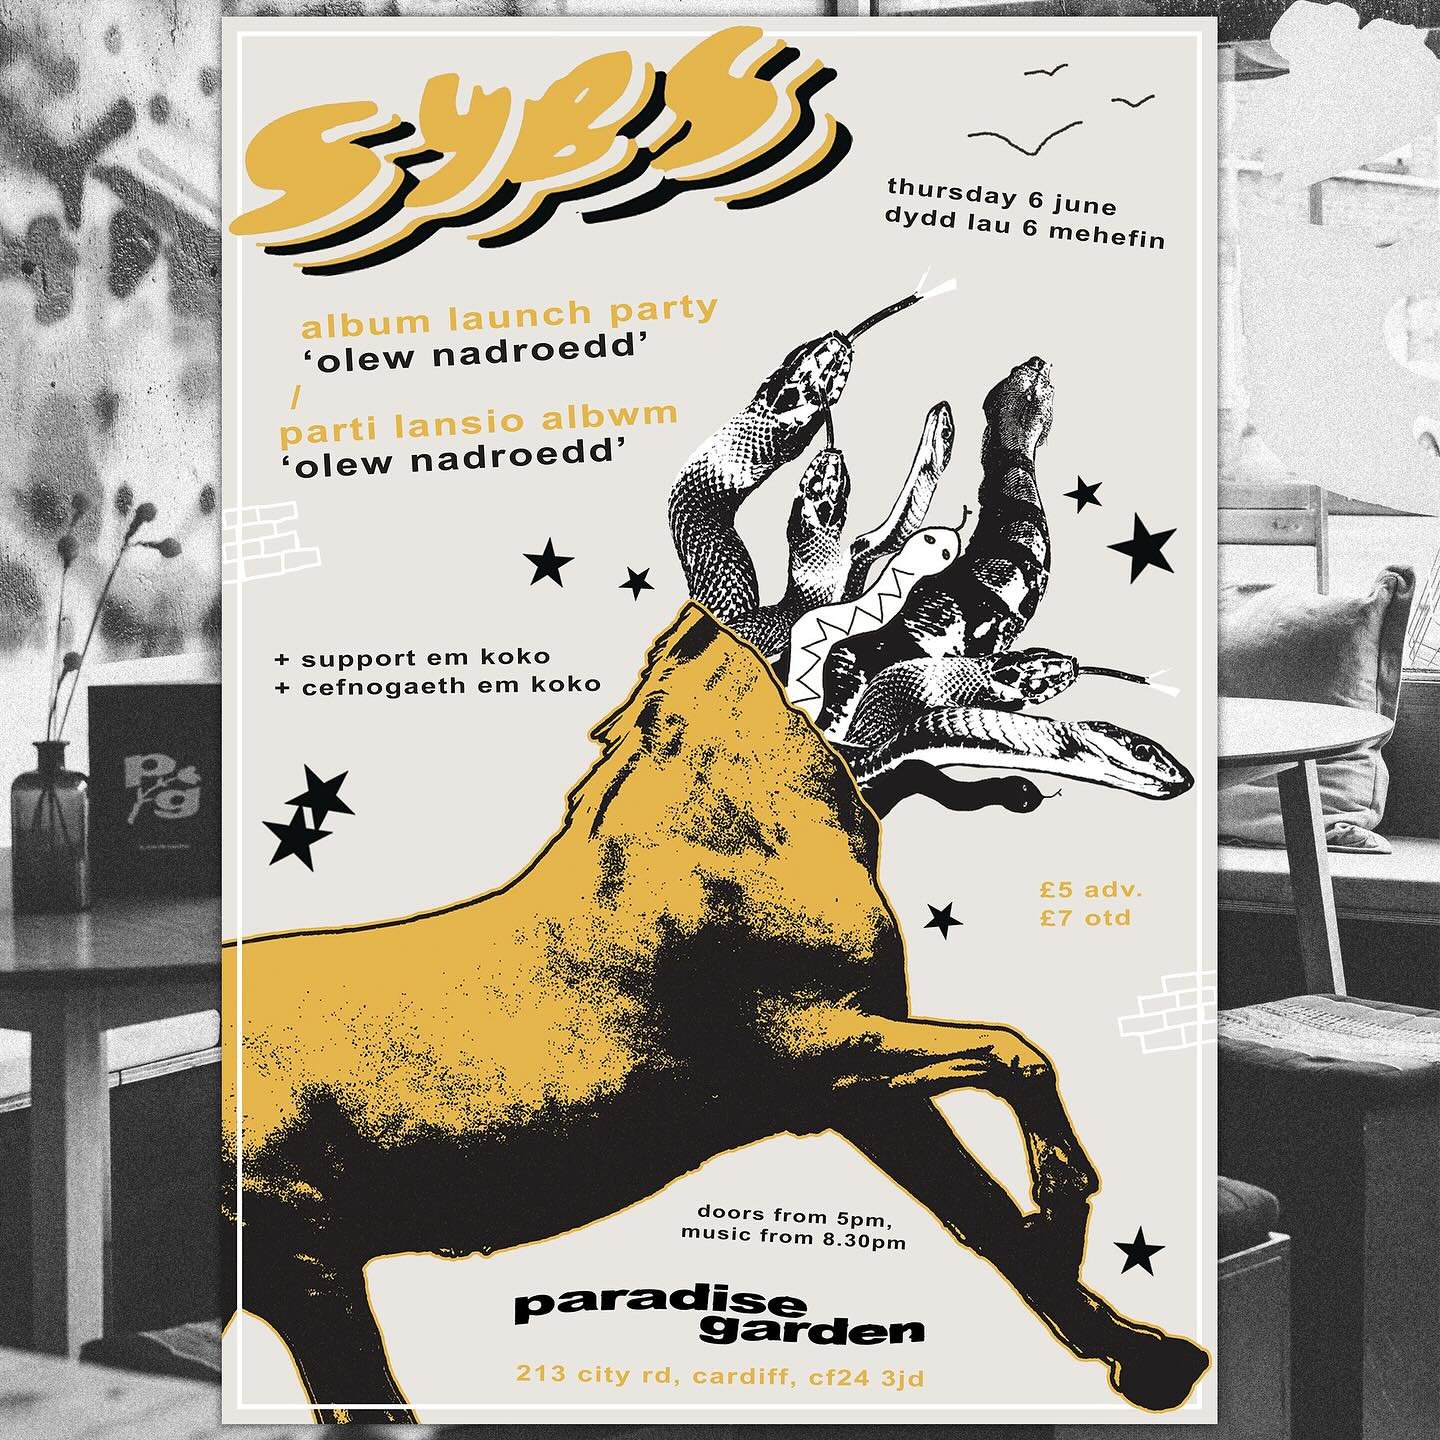 Hypnotic indie/post-punk slackers @sybsband showcase their debut LP &lsquo;Olew Nadroedd&rsquo; at PG for a special intimate album launch party - Thursday June 6th 🌿💛

Plus we have gritty dream-pop goodness from @x.emkoko on support ✨

Tickets avai